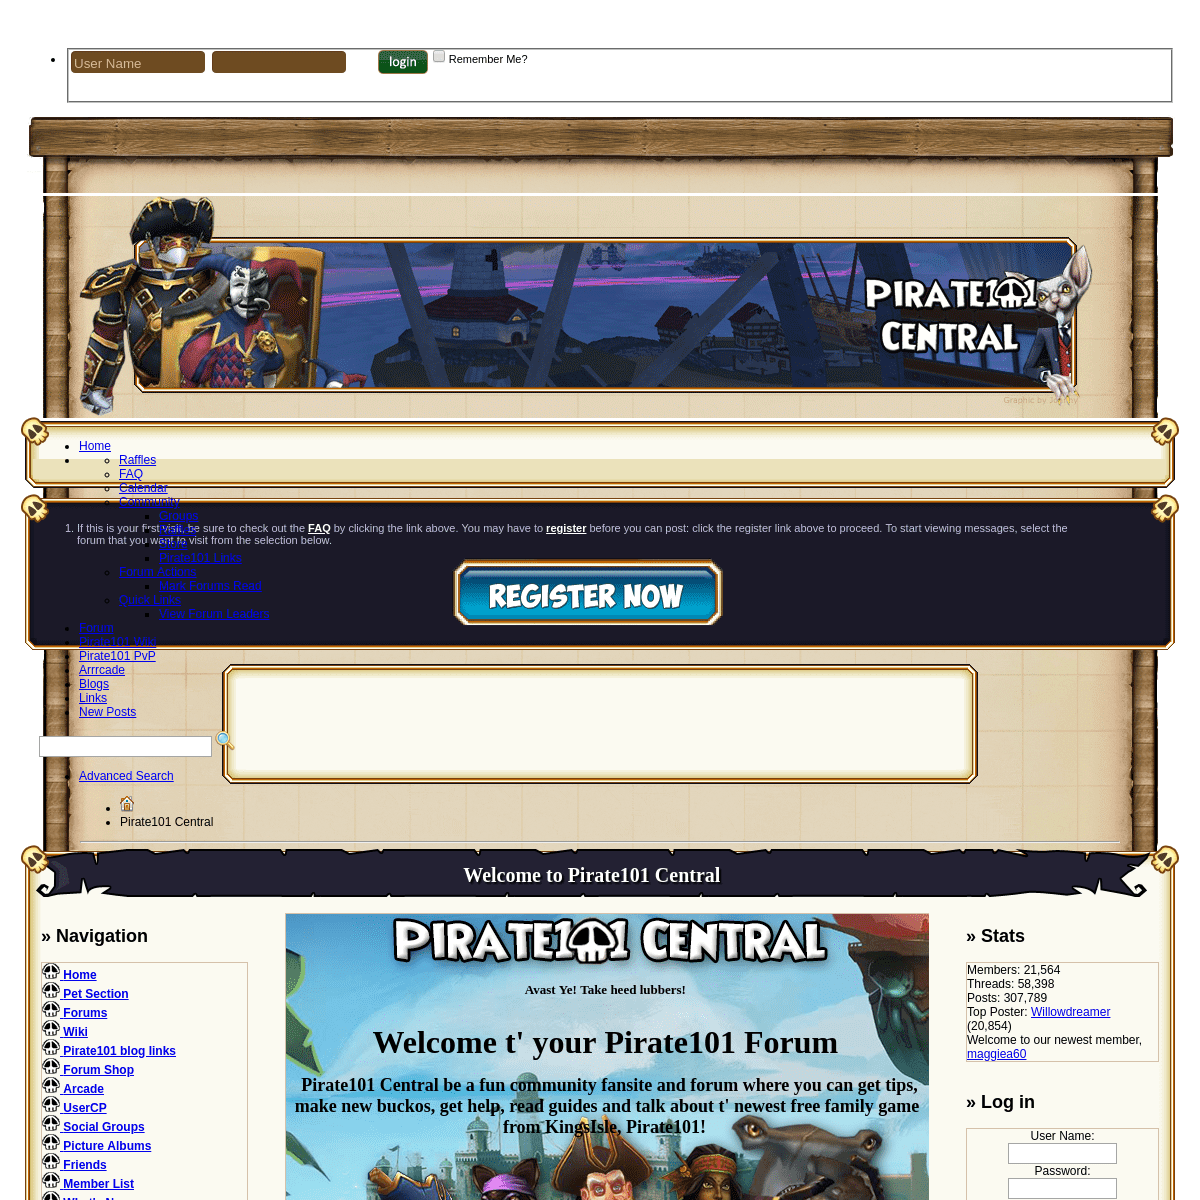 A complete backup of pirate101central.com